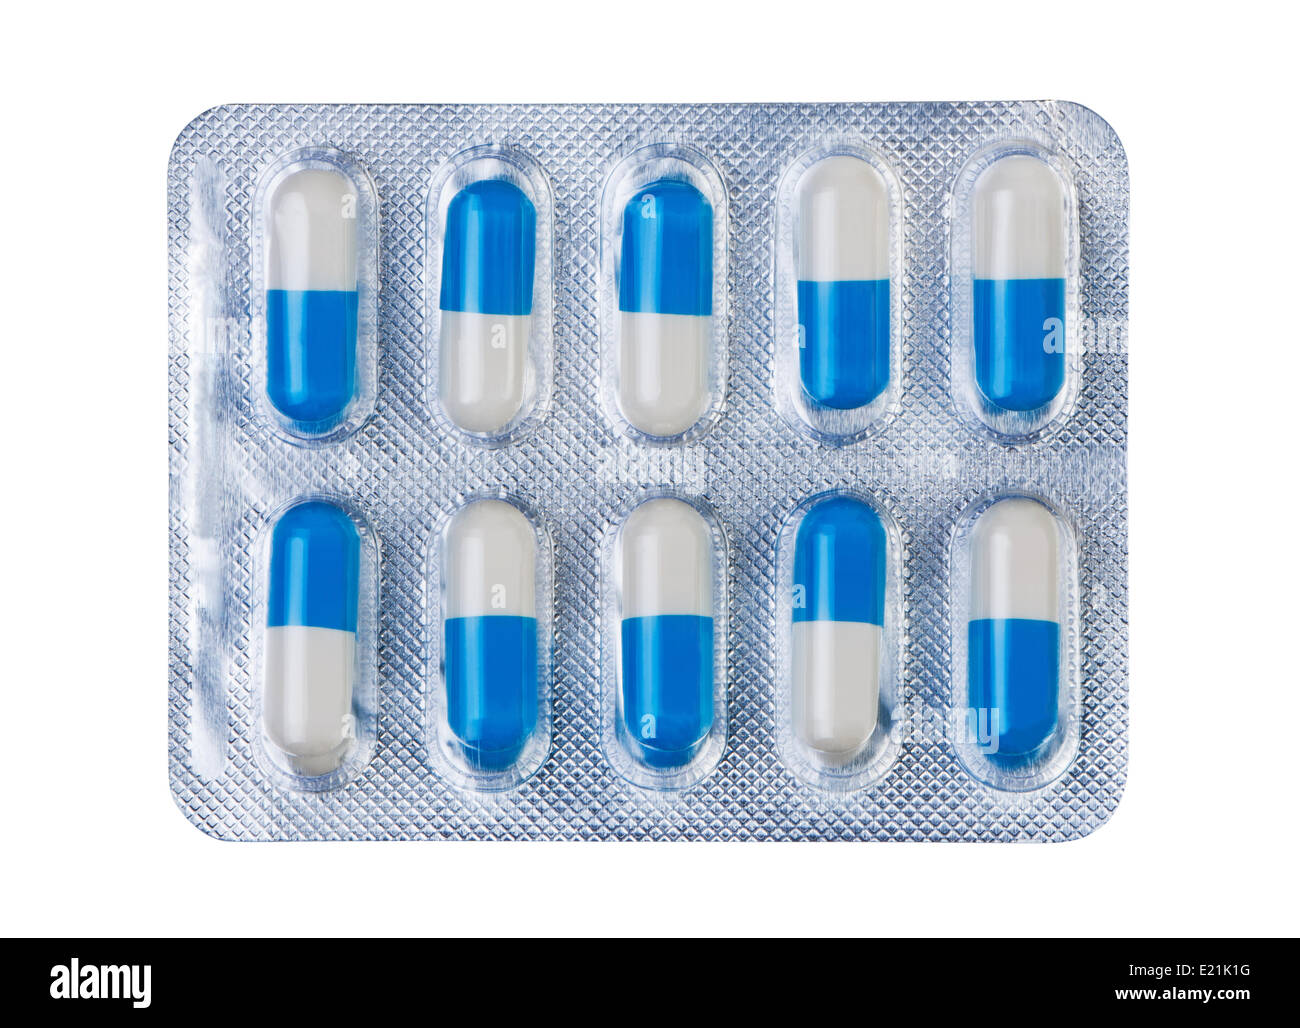 Pills in pack isolate on white background. Stock Photo